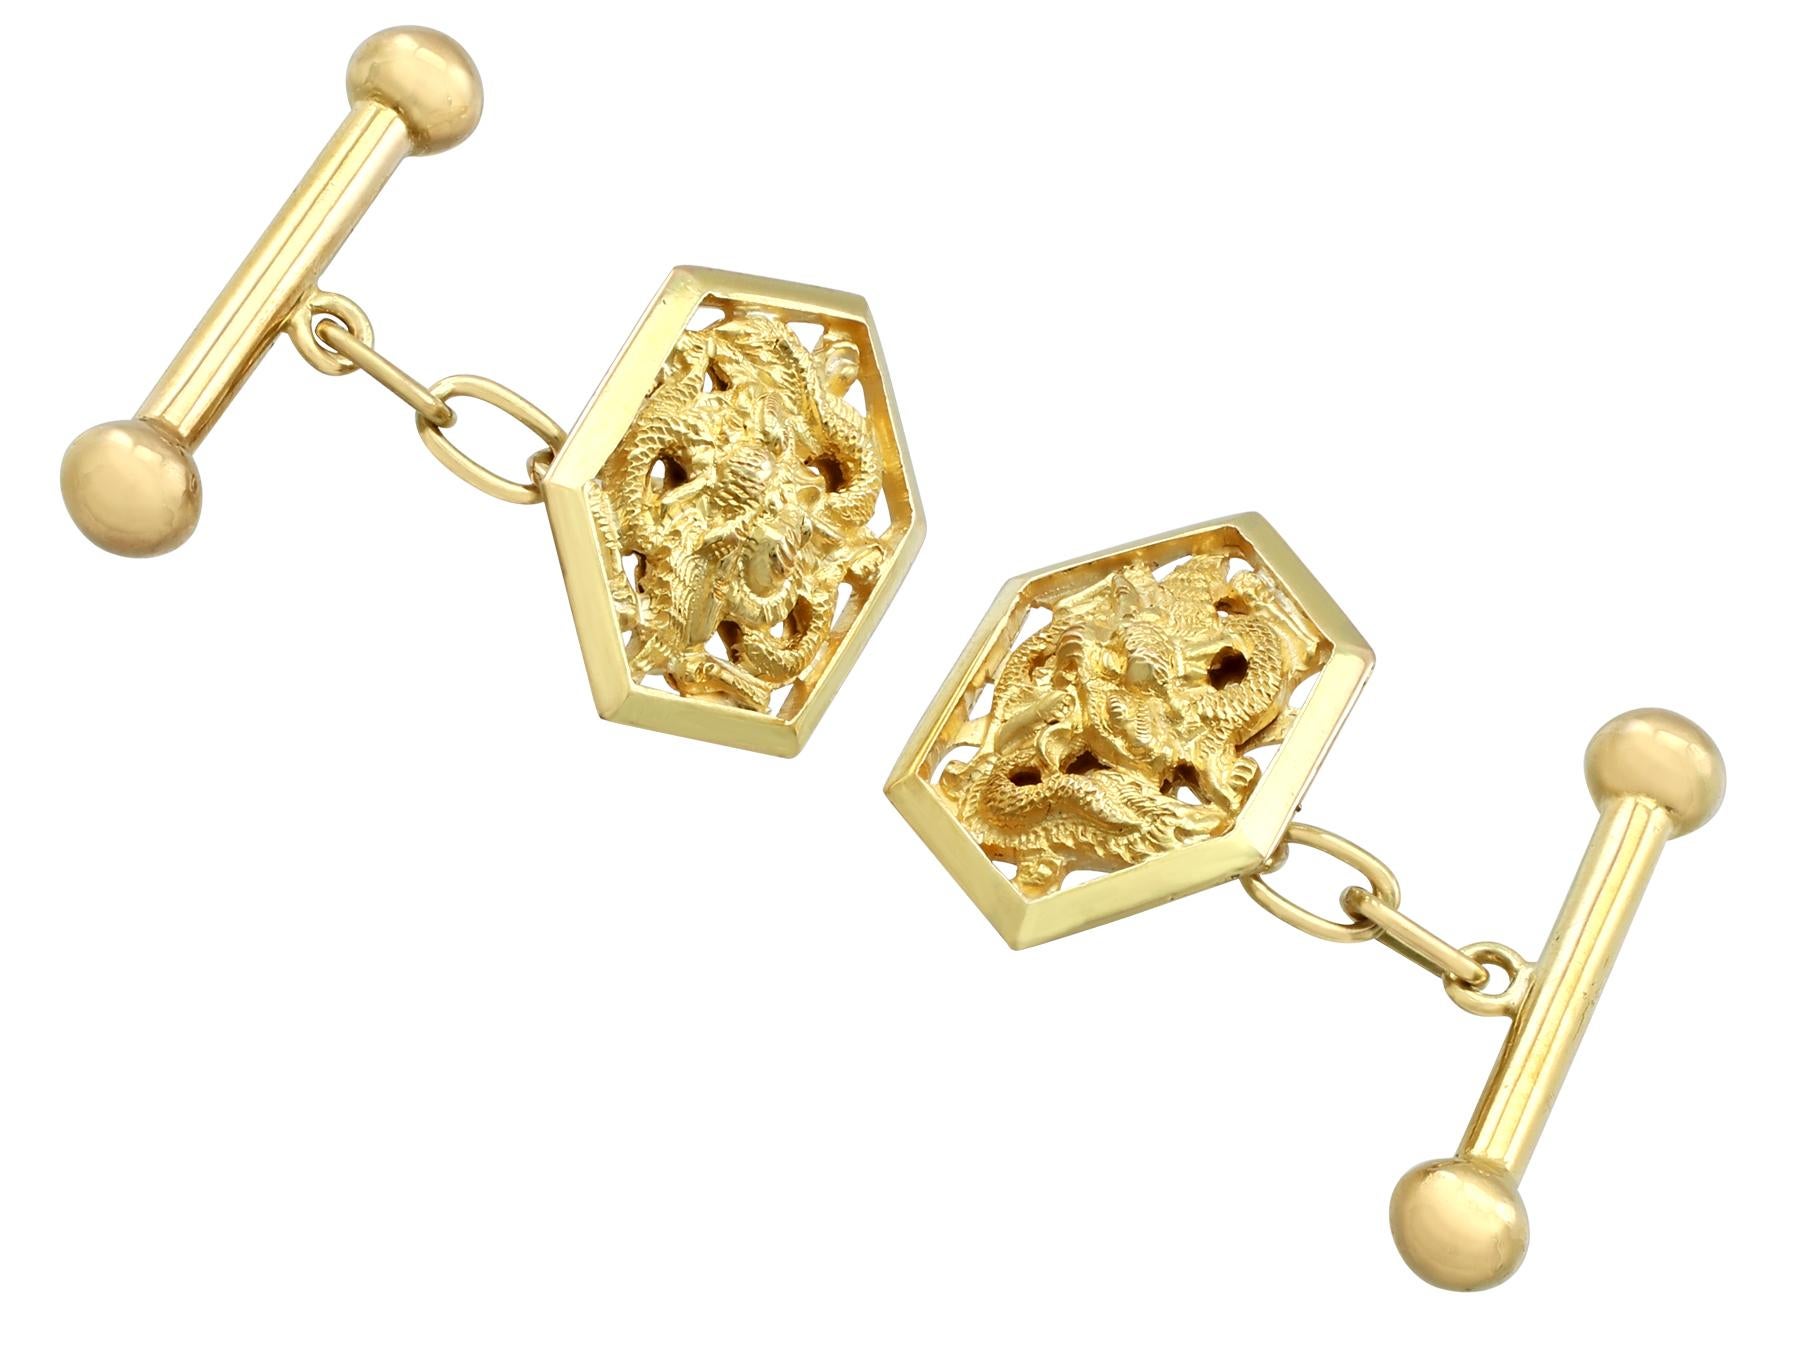 An impressive pair of antique Chinese 18 karat yellow gold 'dragon' cufflinks; part of our diverse antique jewelry and estate jewelry collections.

These fine and impressive cufflinks have been crafted in 18k yellow gold.

The anterior links have a